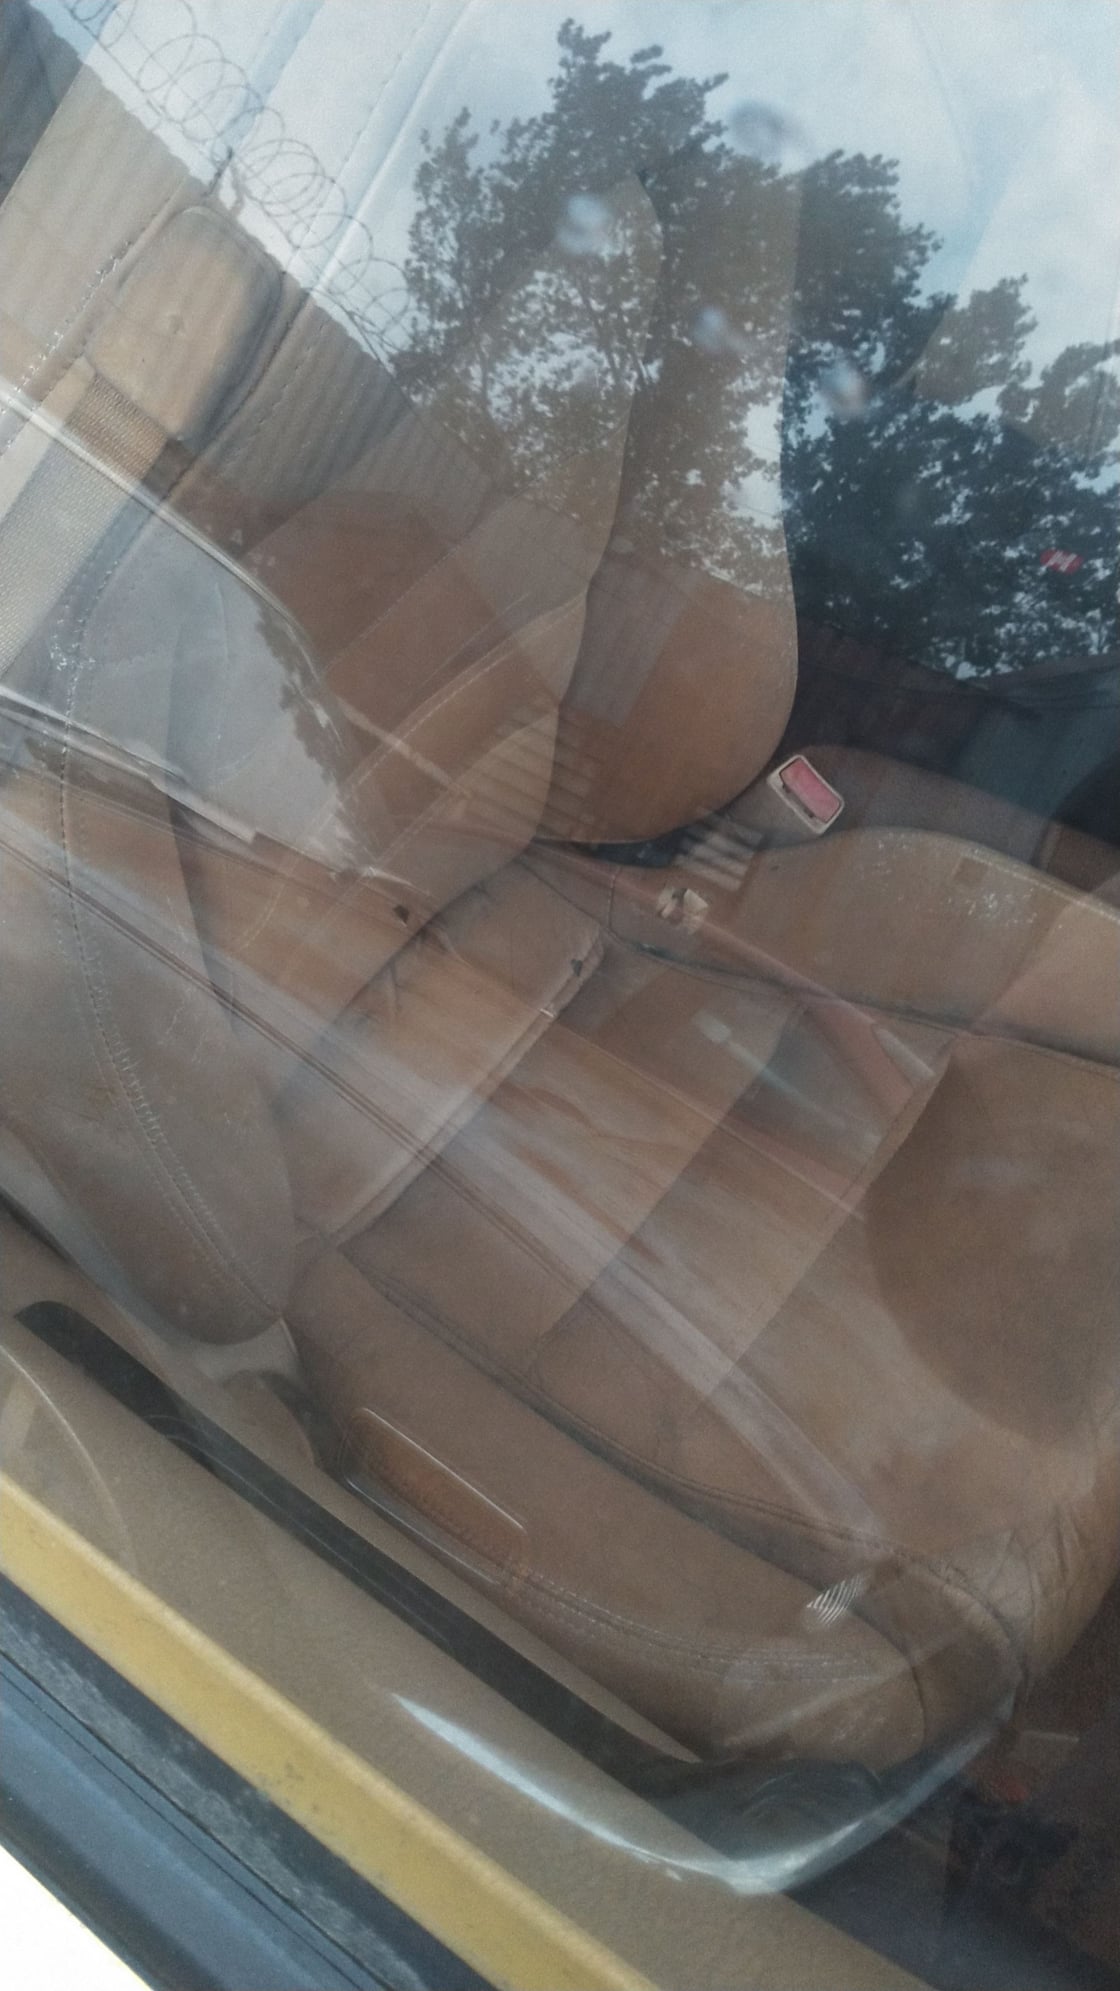 Interior/Upholstery - 93 touring tan leather for parts or repairs - Used - 1993 to 1995 Mazda RX-7 - Woodhaven, NY 11421, United States